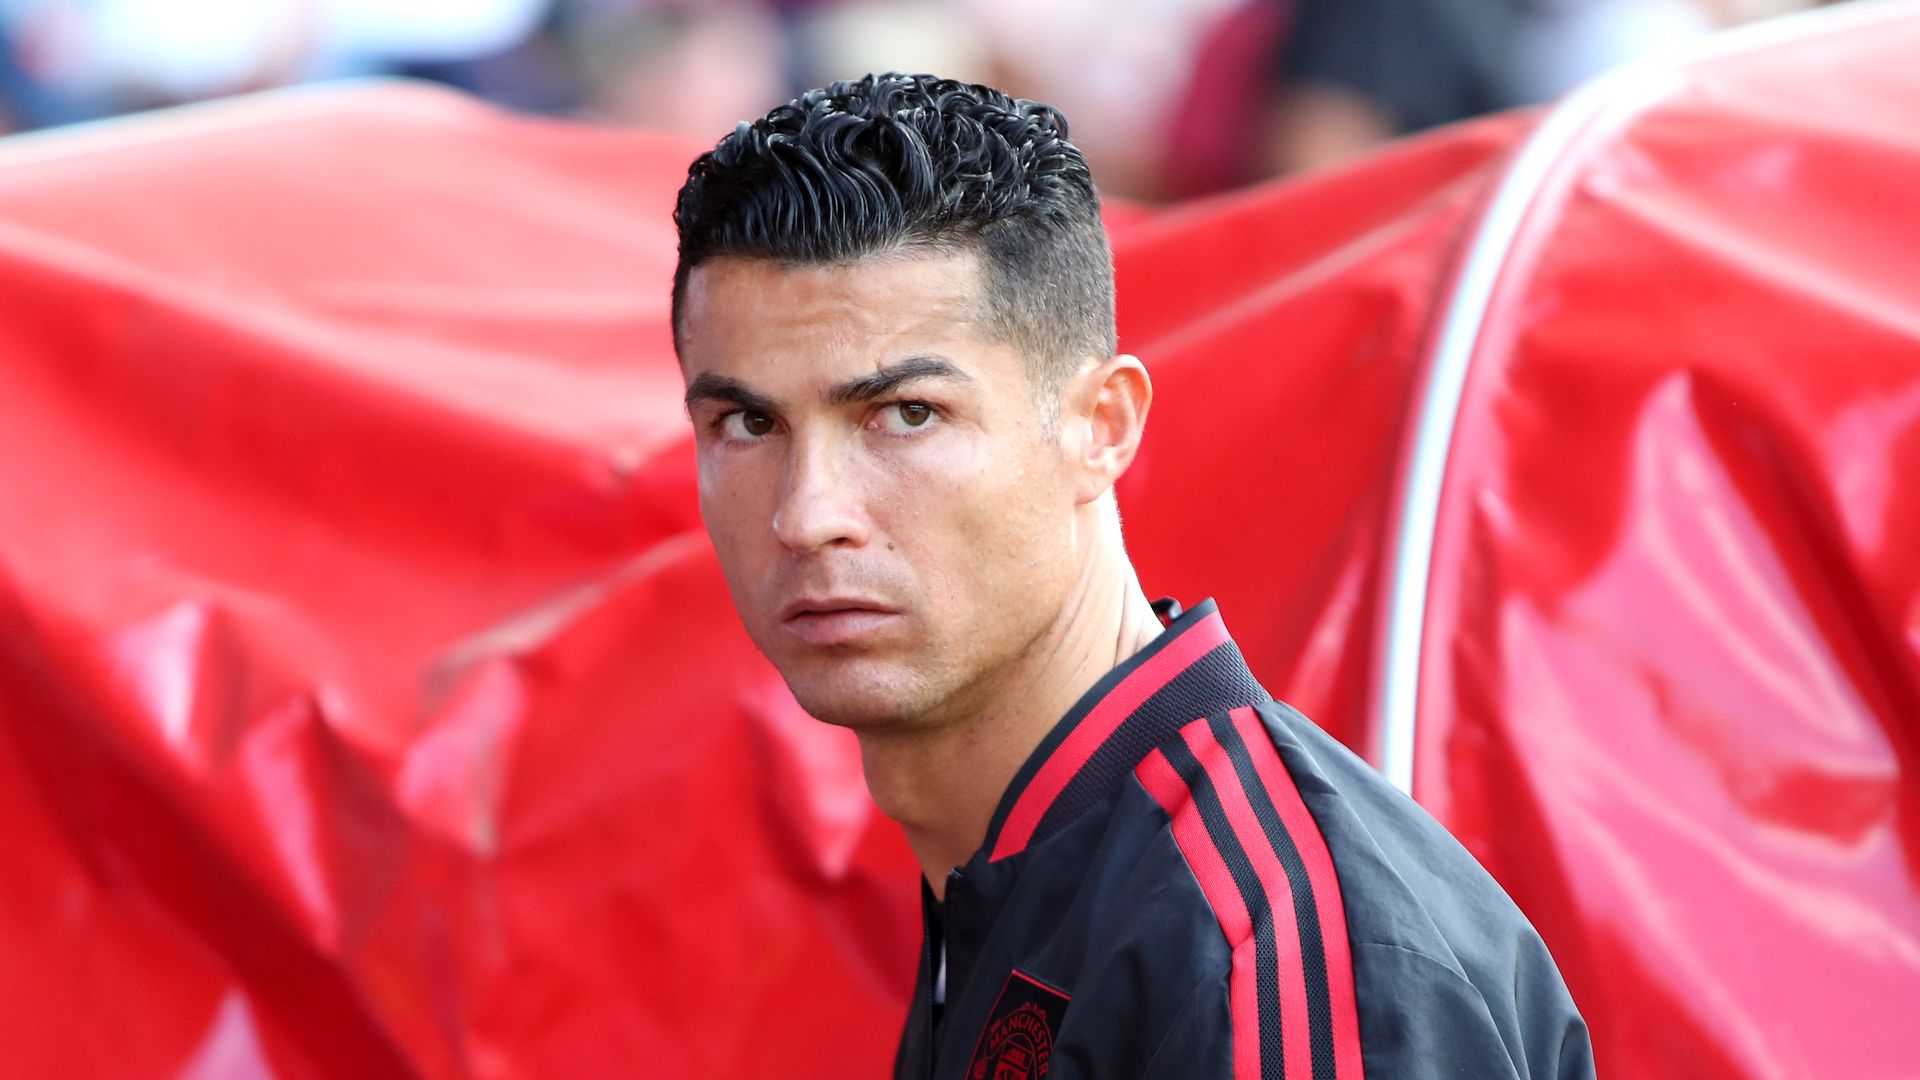 Ronaldo: Utd doubted me over daughter's illness | 'Glazers don't care about club'